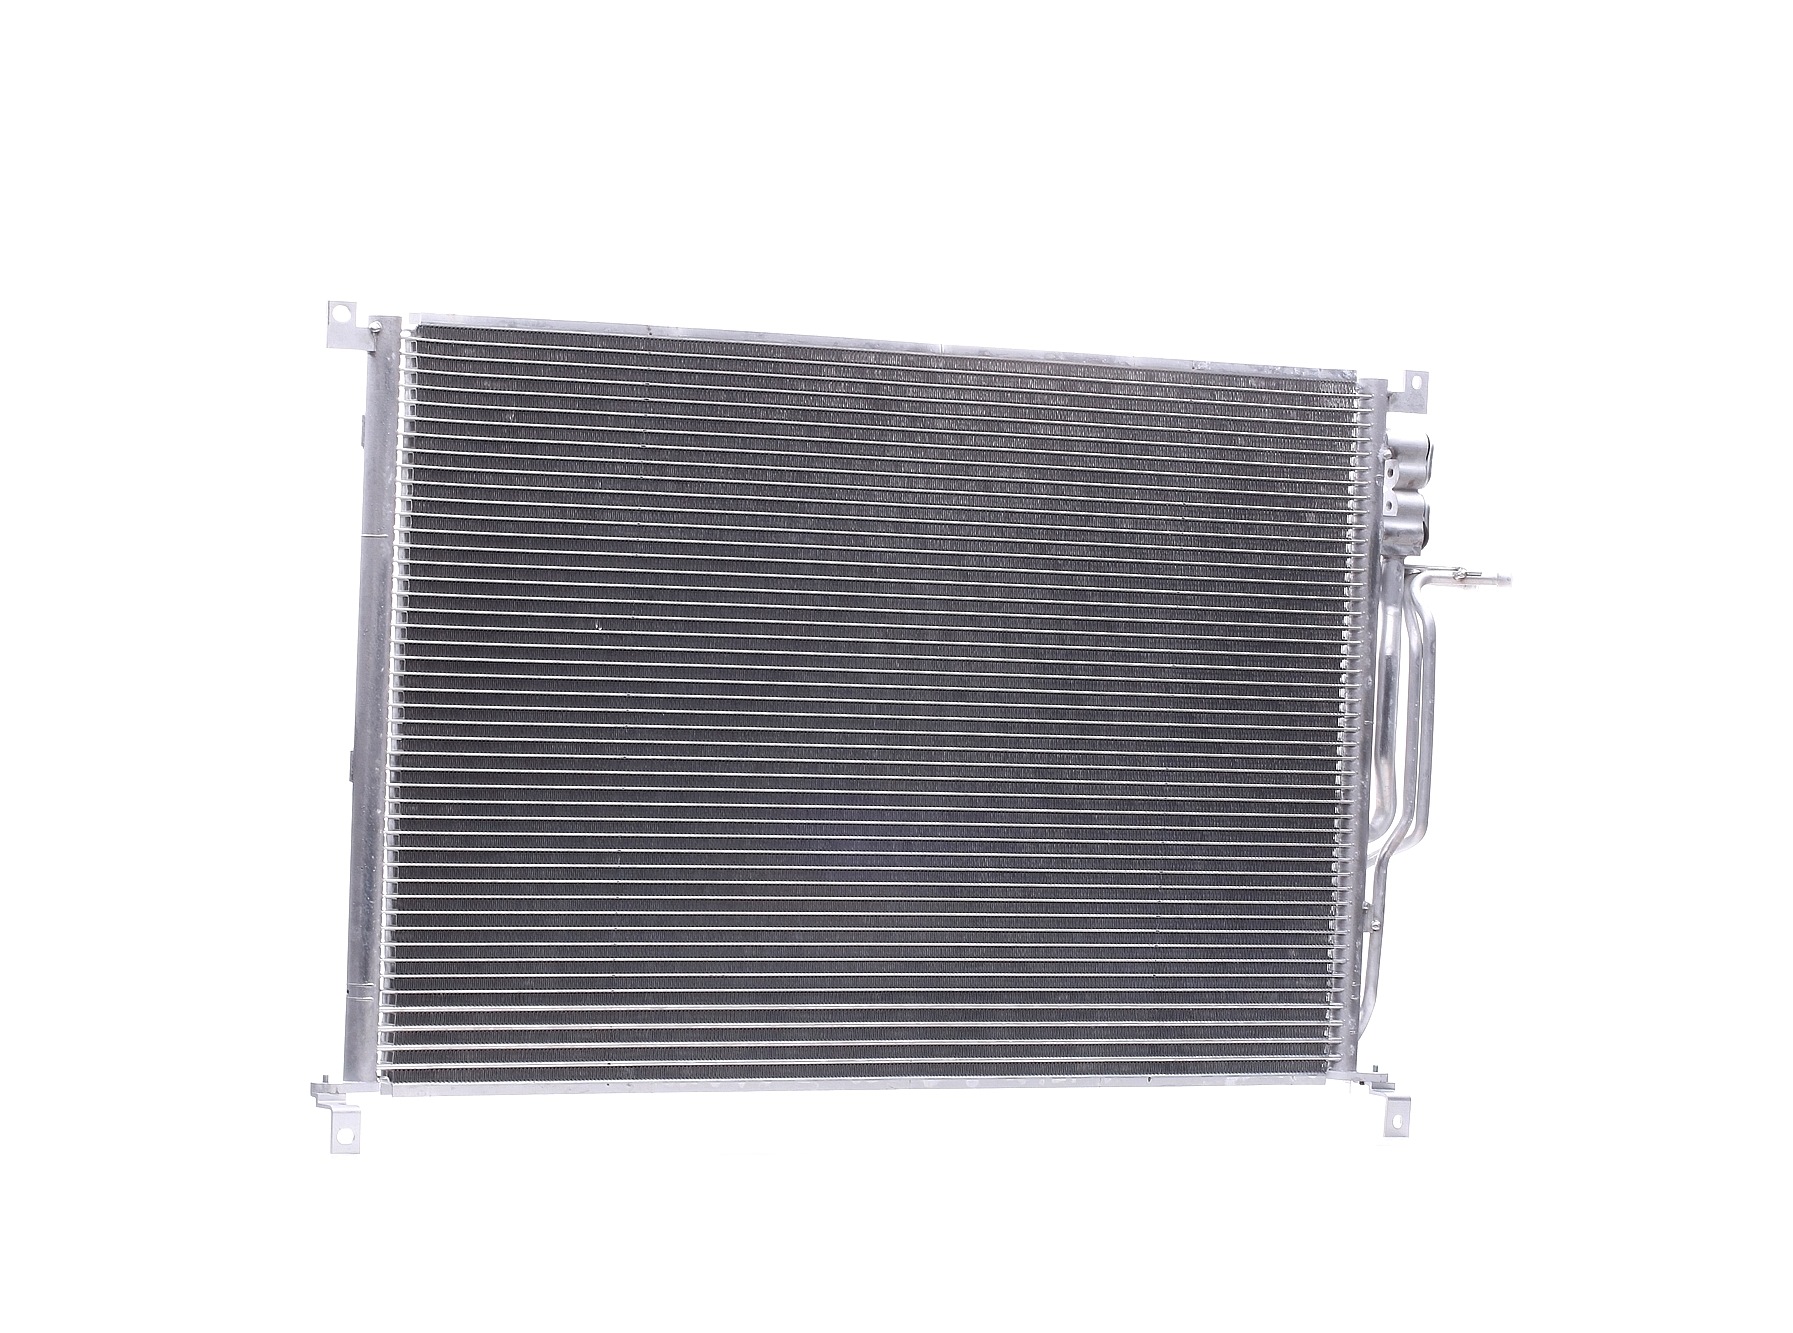 STARK SKCD-0110576 Air conditioning condenser without dryer, 769 x 473 x 16 mm, Aluminium